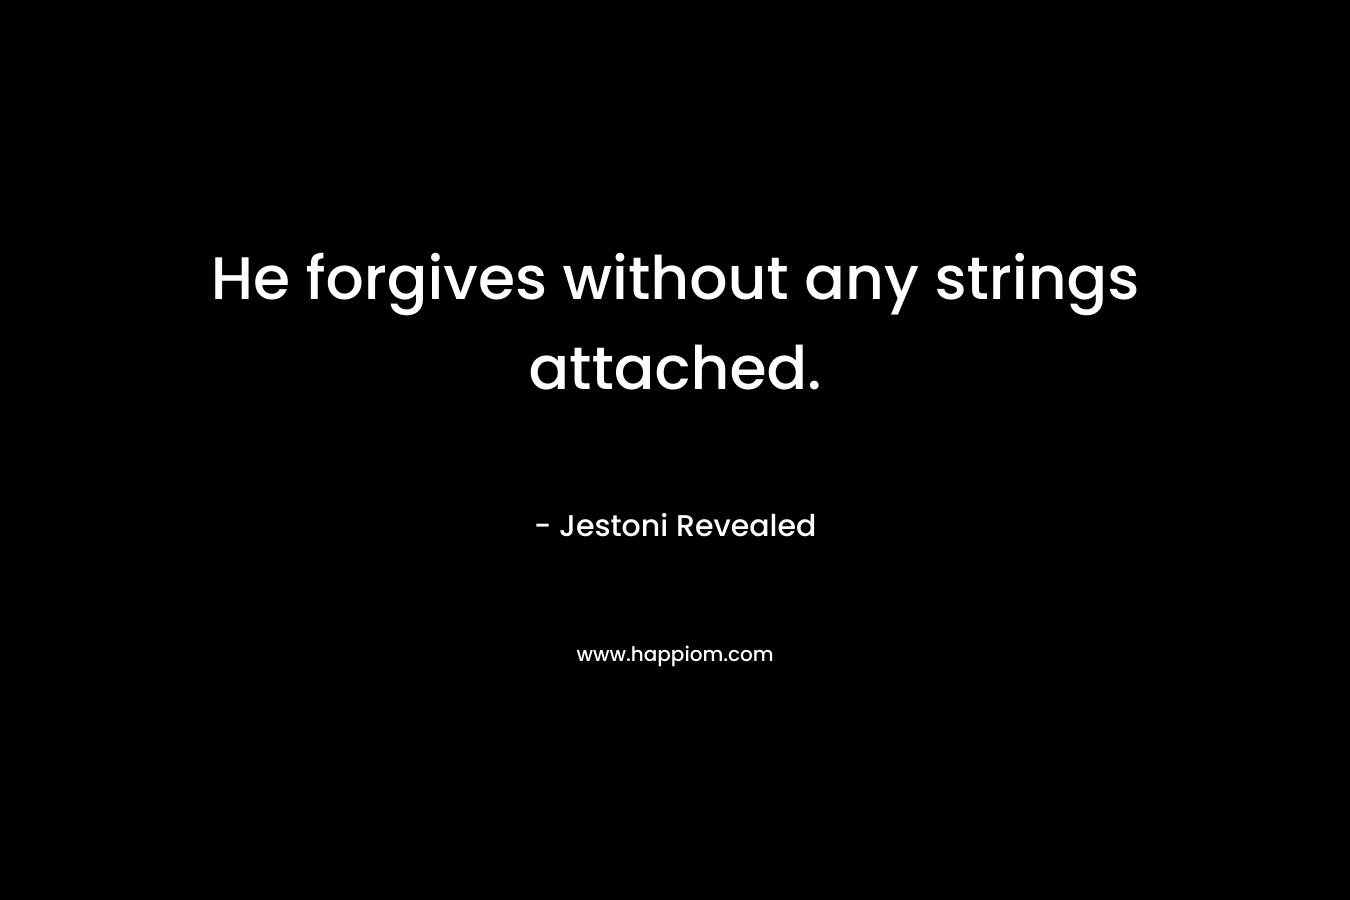 He forgives without any strings attached.